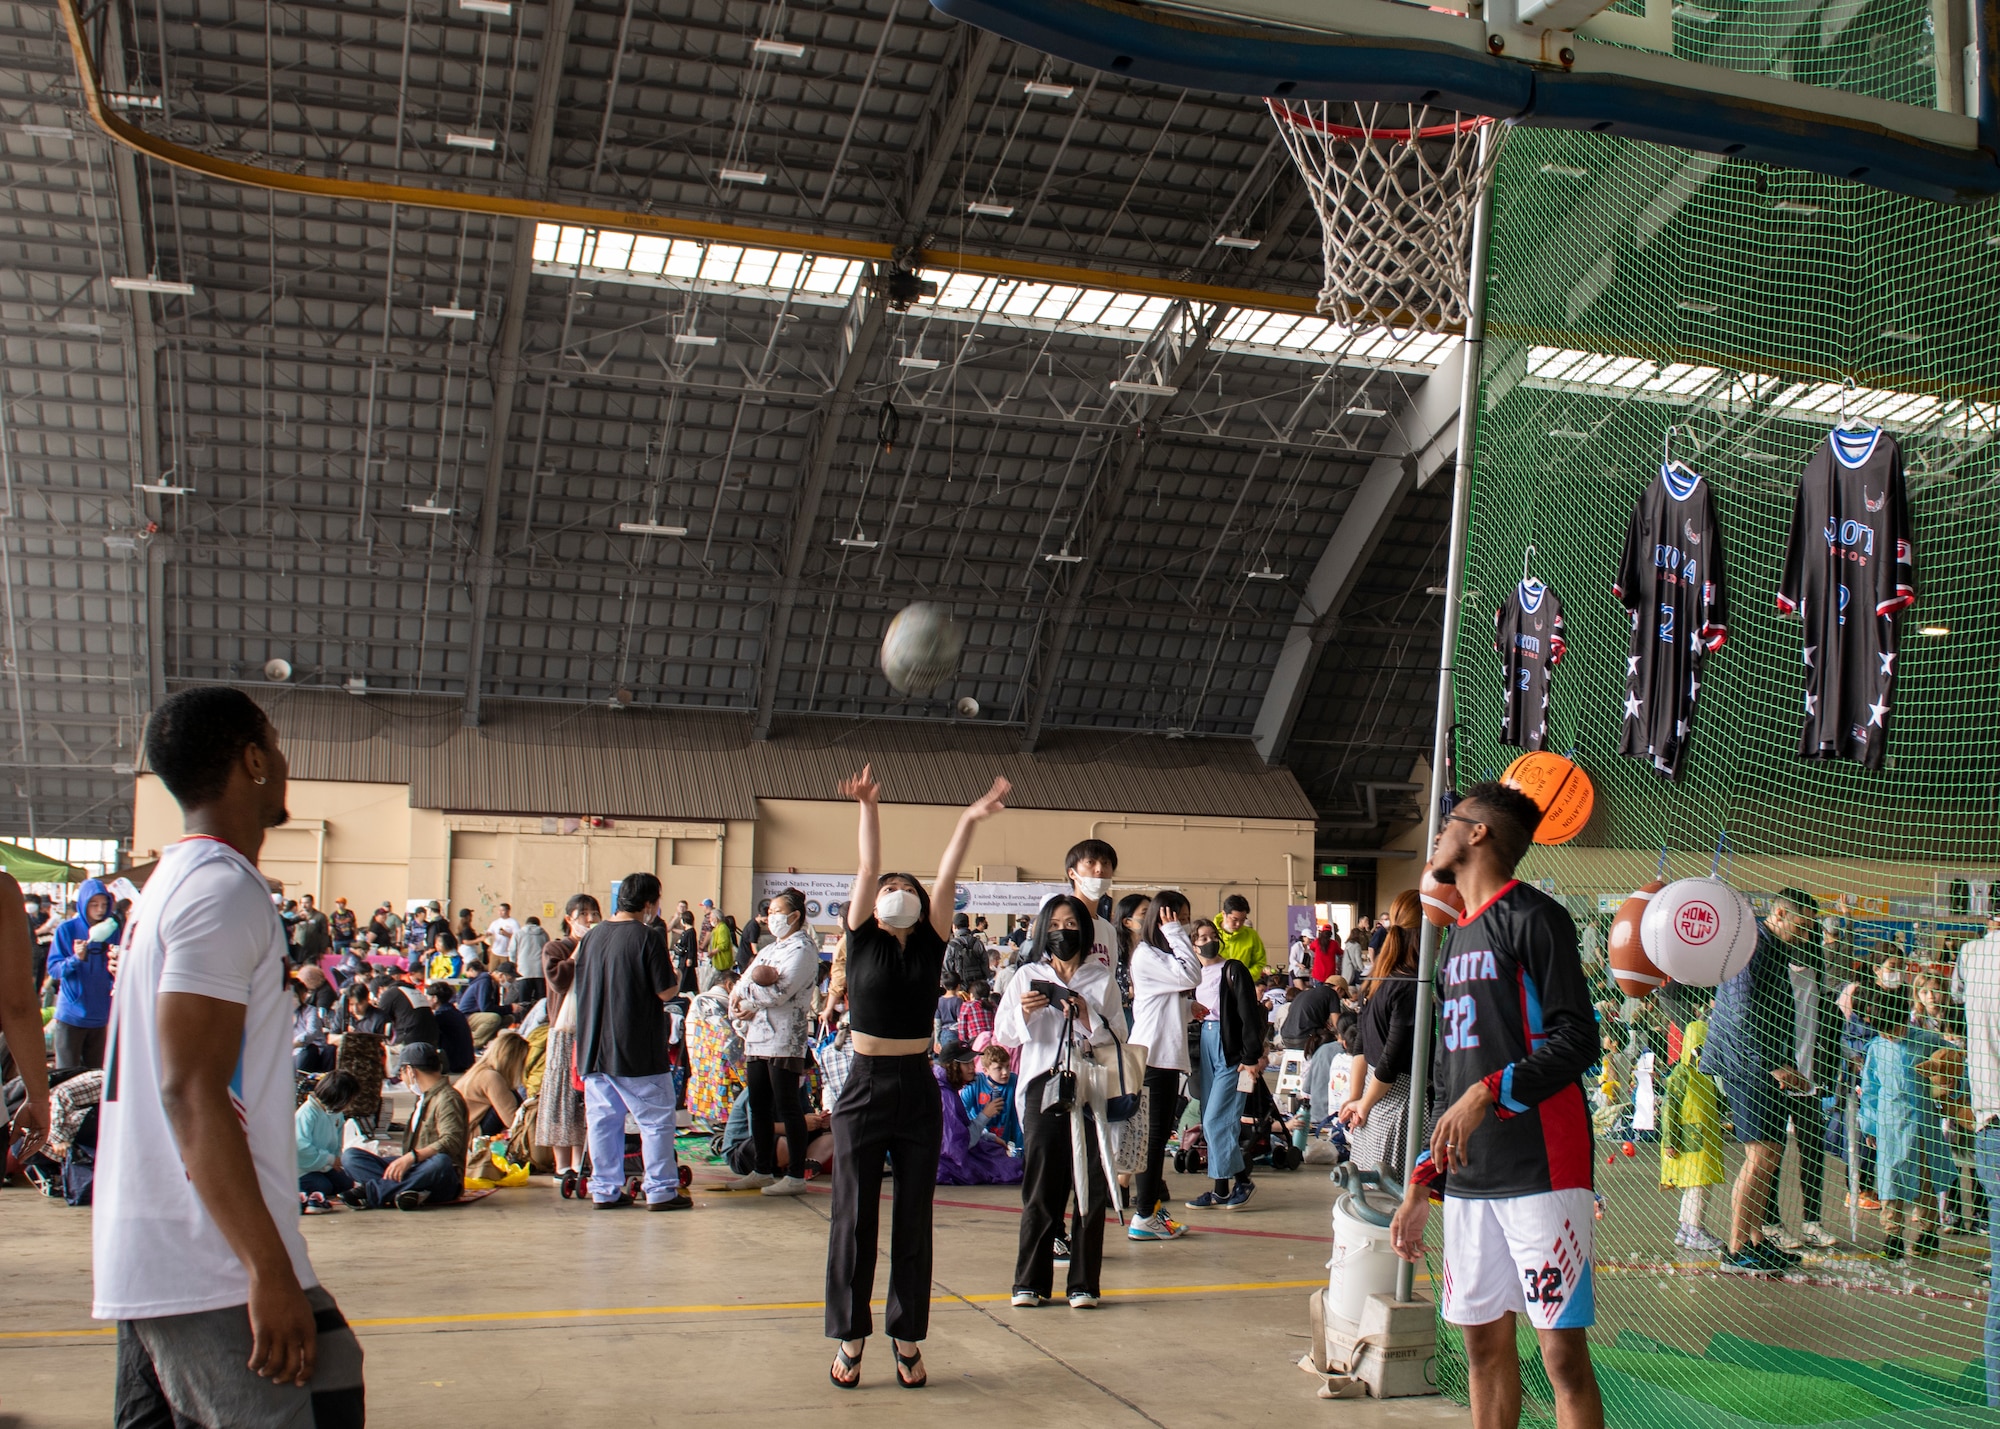 A festival visitor shoots hoops during the Friendship Festival 2022, at Yokota Air Base, Japan, May 21, 2022. The two-day festival was an opportunity for visitors to learn more about the U.S. and Japan bilateral partnership, while strengthening the bonds between Yokota and the local communities. Yokota was able to host the event with the support of Japanese Self-Defense Force, sister services and the local community. (U.S. Air Force photo by Staff Sgt. Ryan Lackey)